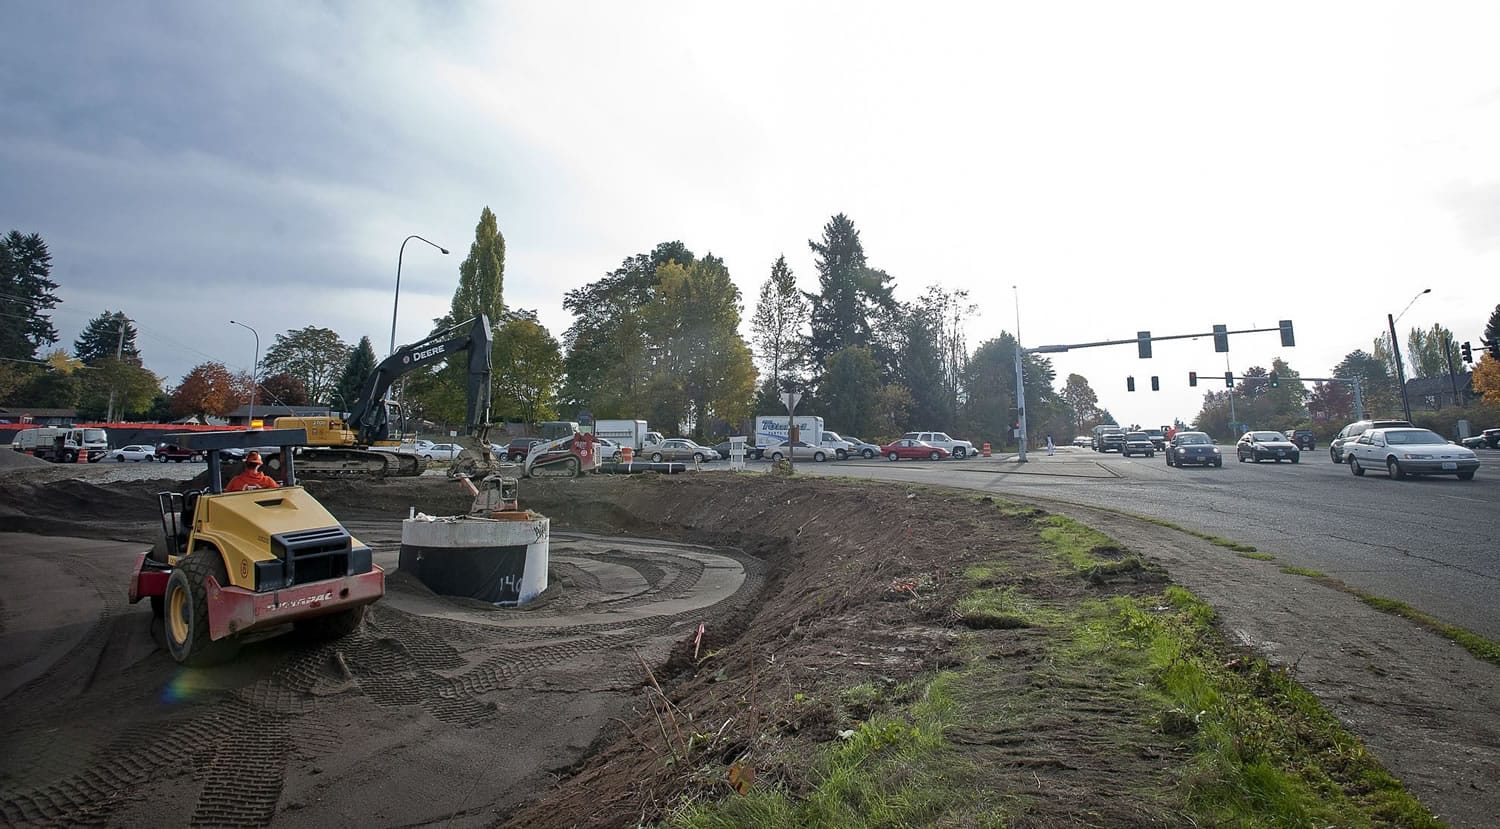 Construction work on the $48 million interchange project at state Highway 500 and St. Johns Boulevard began last spring.